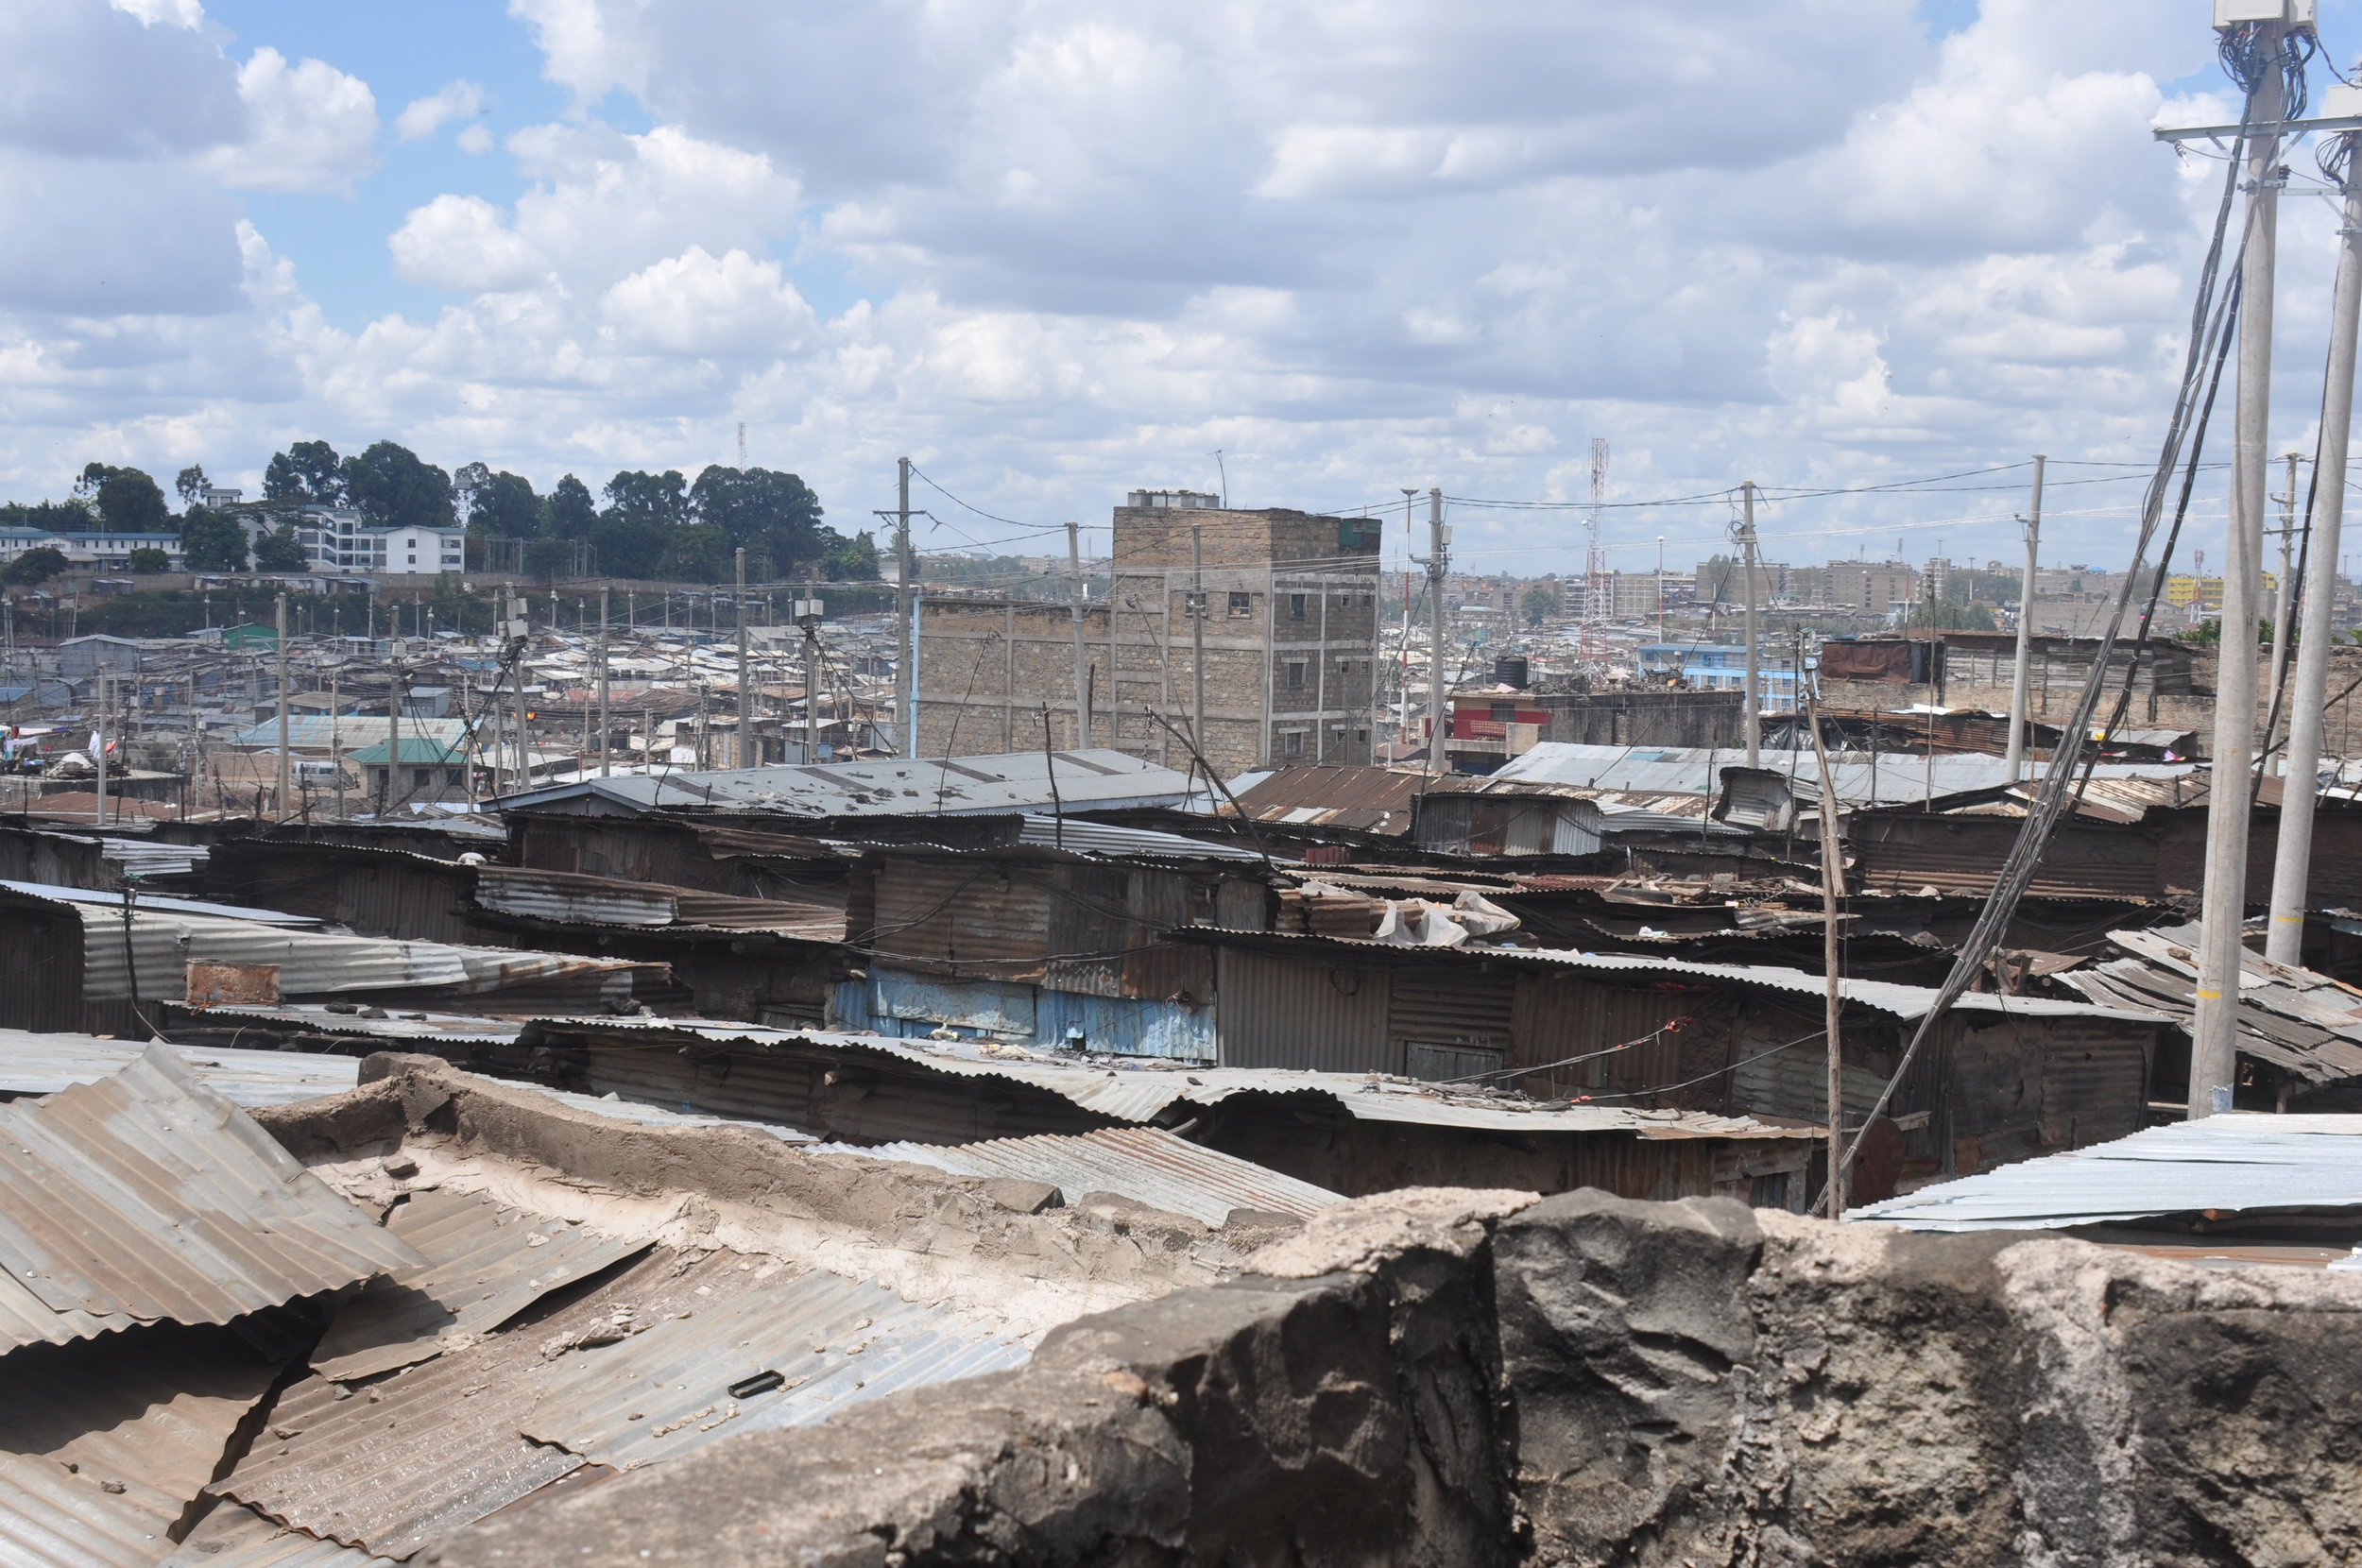  This is Mathare, the giant slum in Nairobi,&nbsp;which is where the students of Mamma Africa come from. 